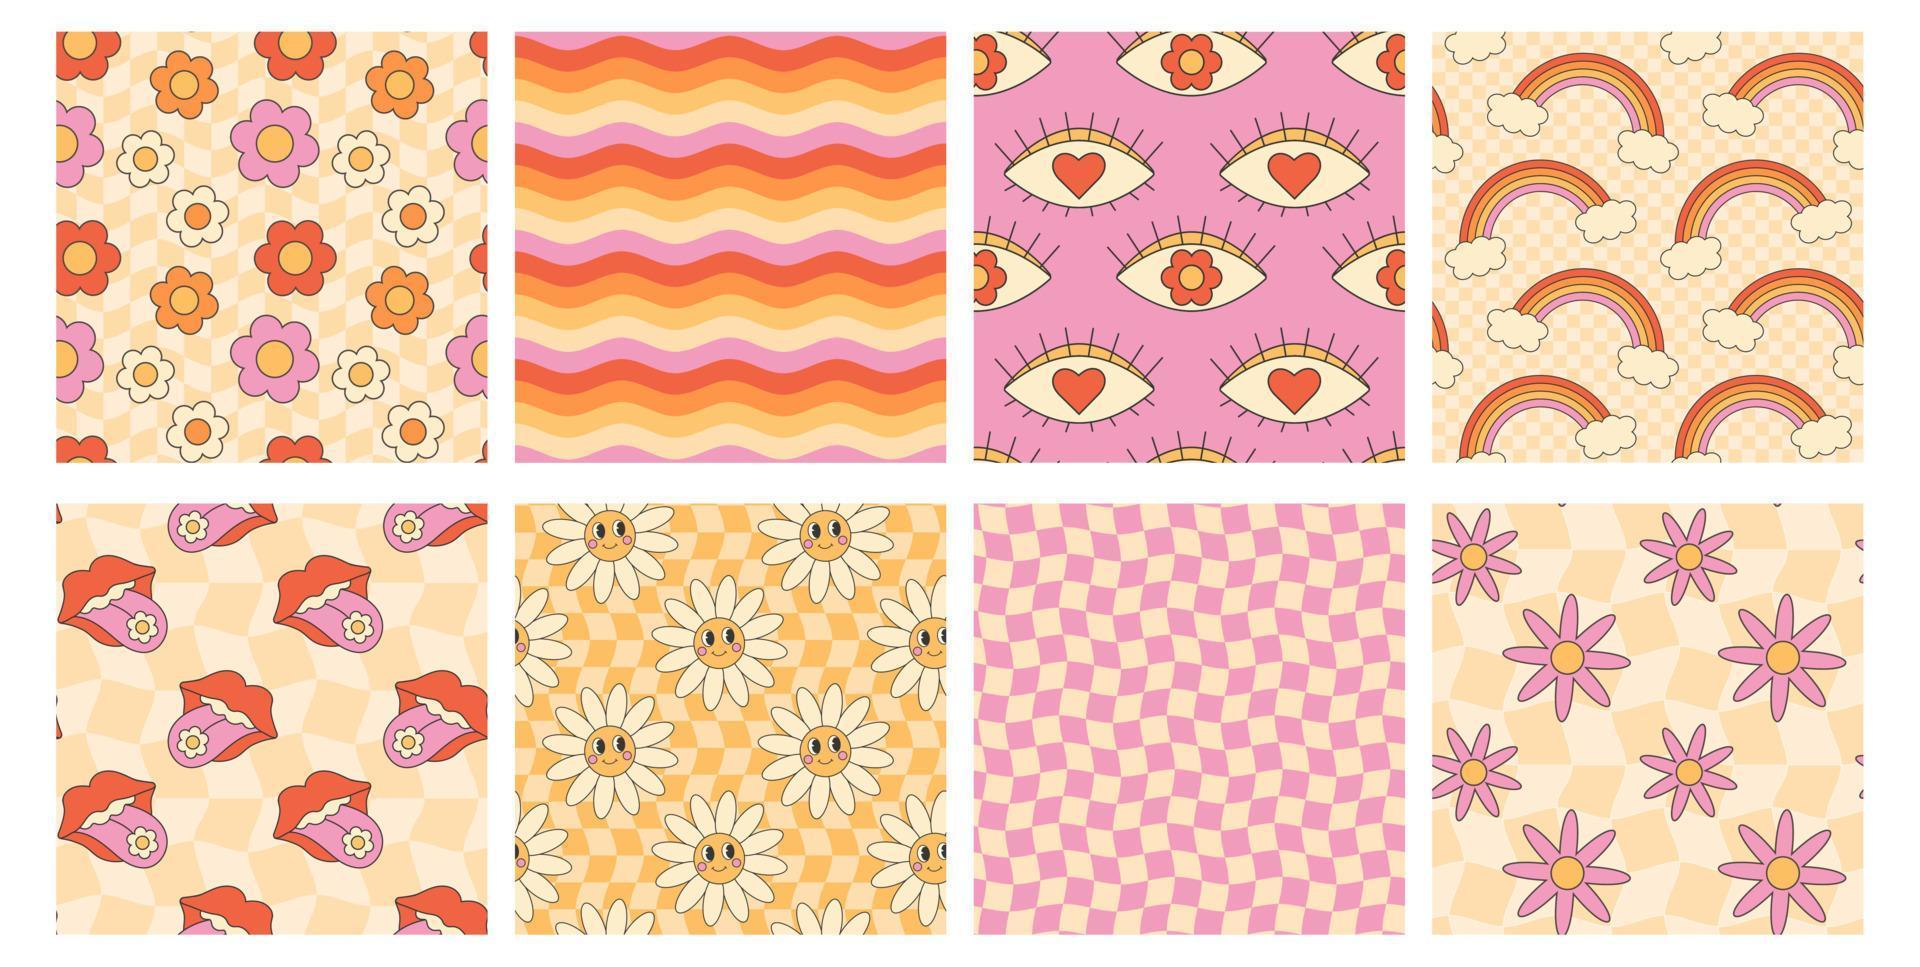 Retro groovy hippie seamless pattern set. Seamless abstract geometric pattern. Floral background. Rainbow, daisy, flower, checkerboard, mouth, tongue, wave vector